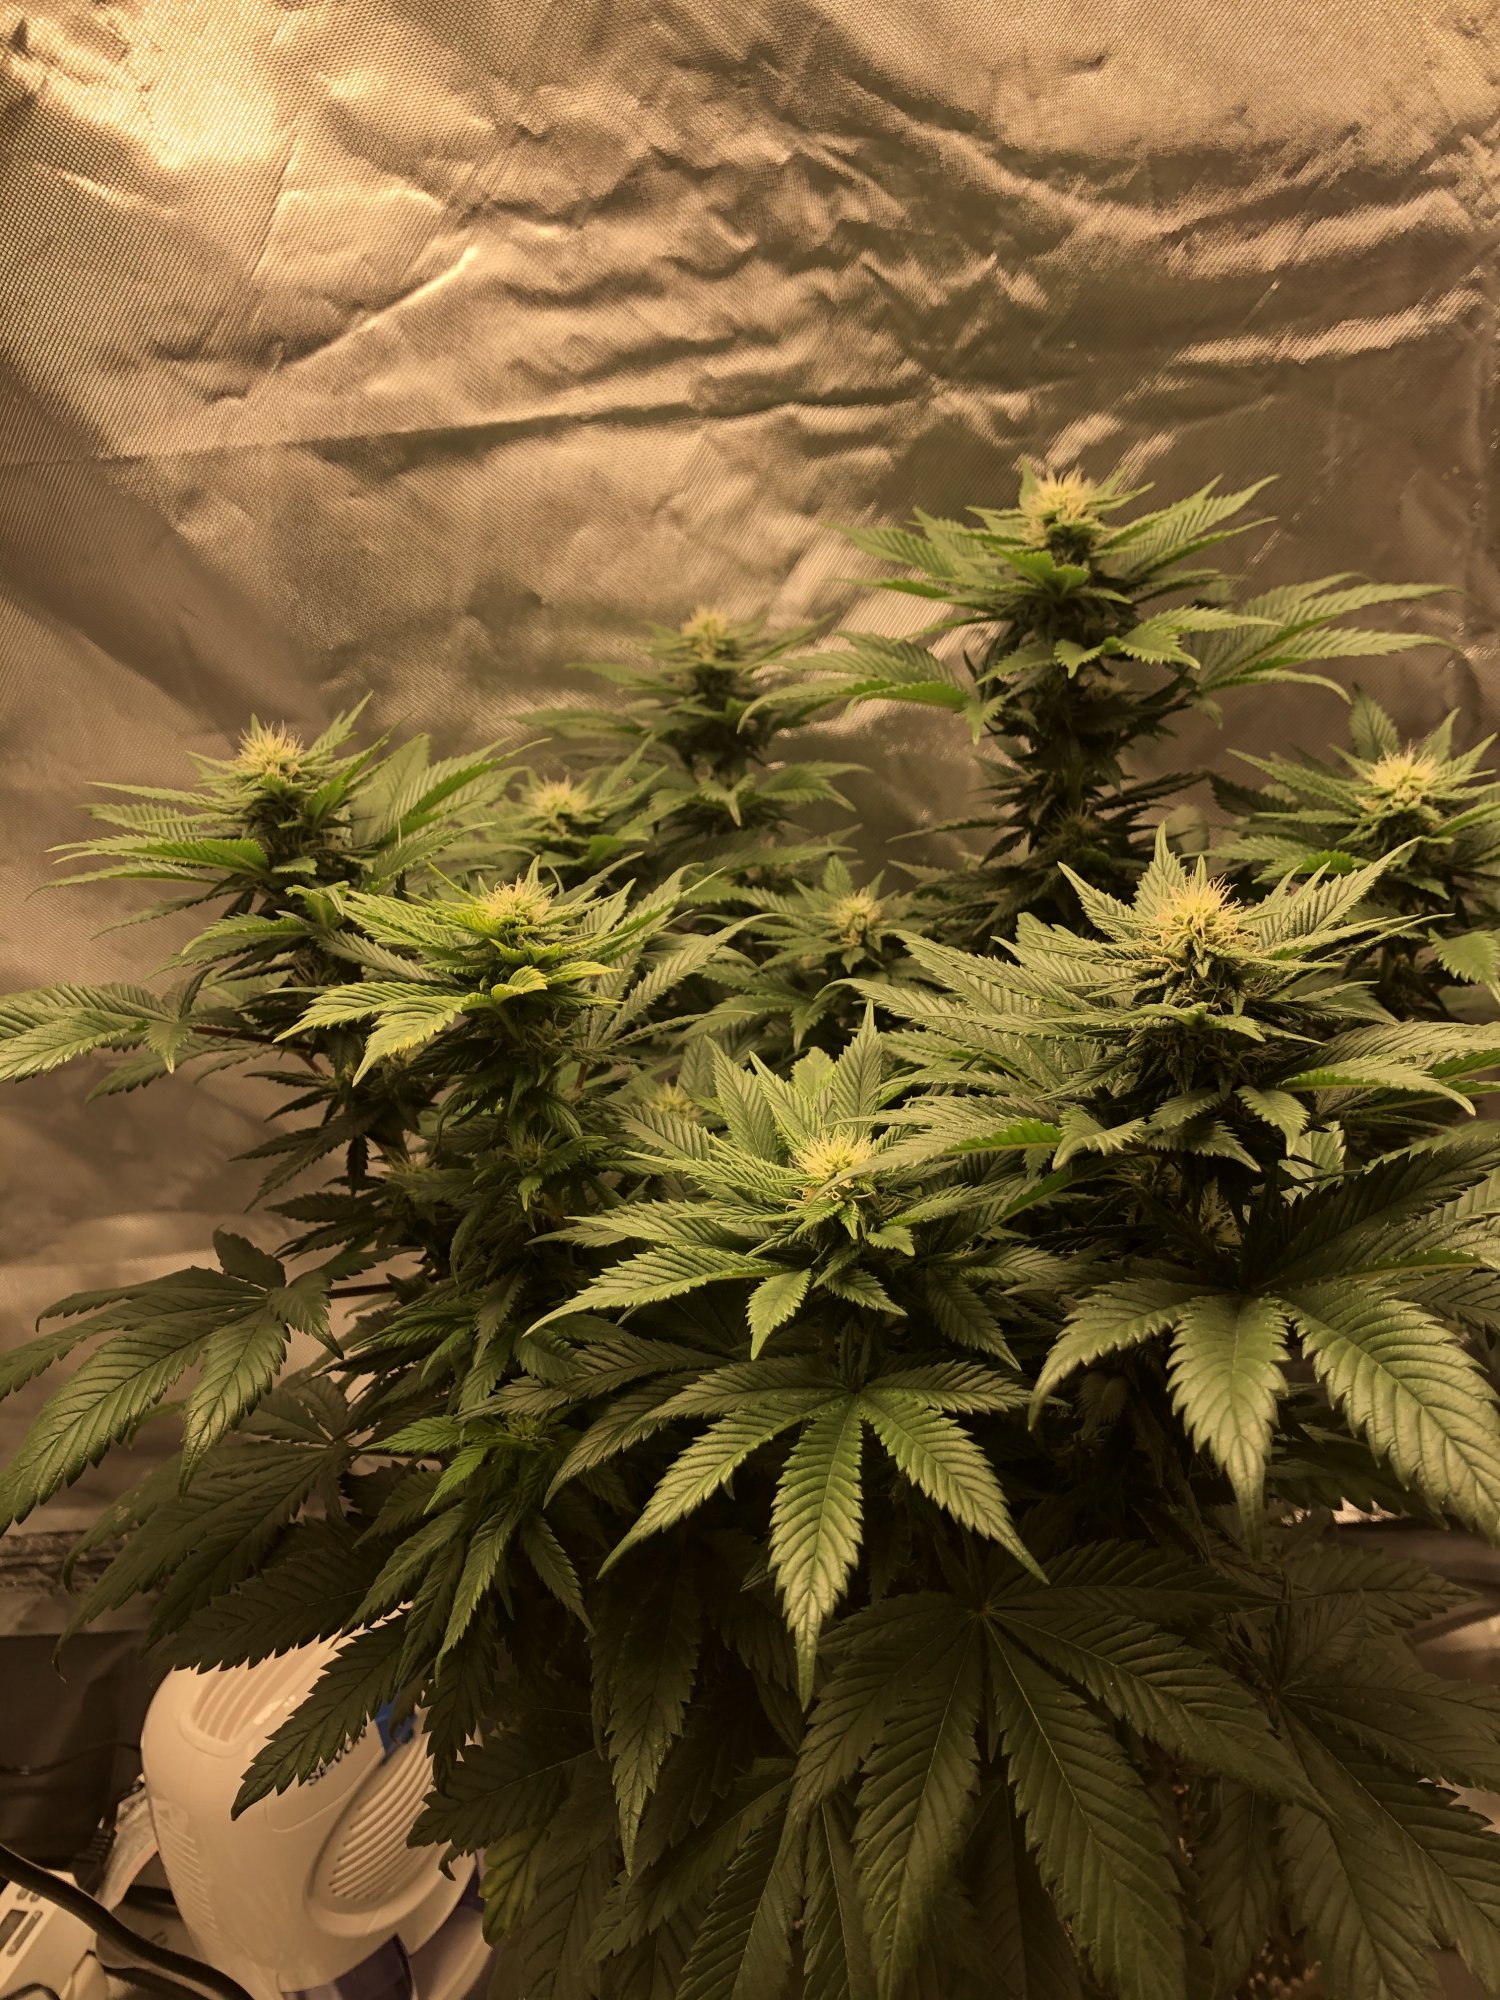 Week 6 flower check in time 6